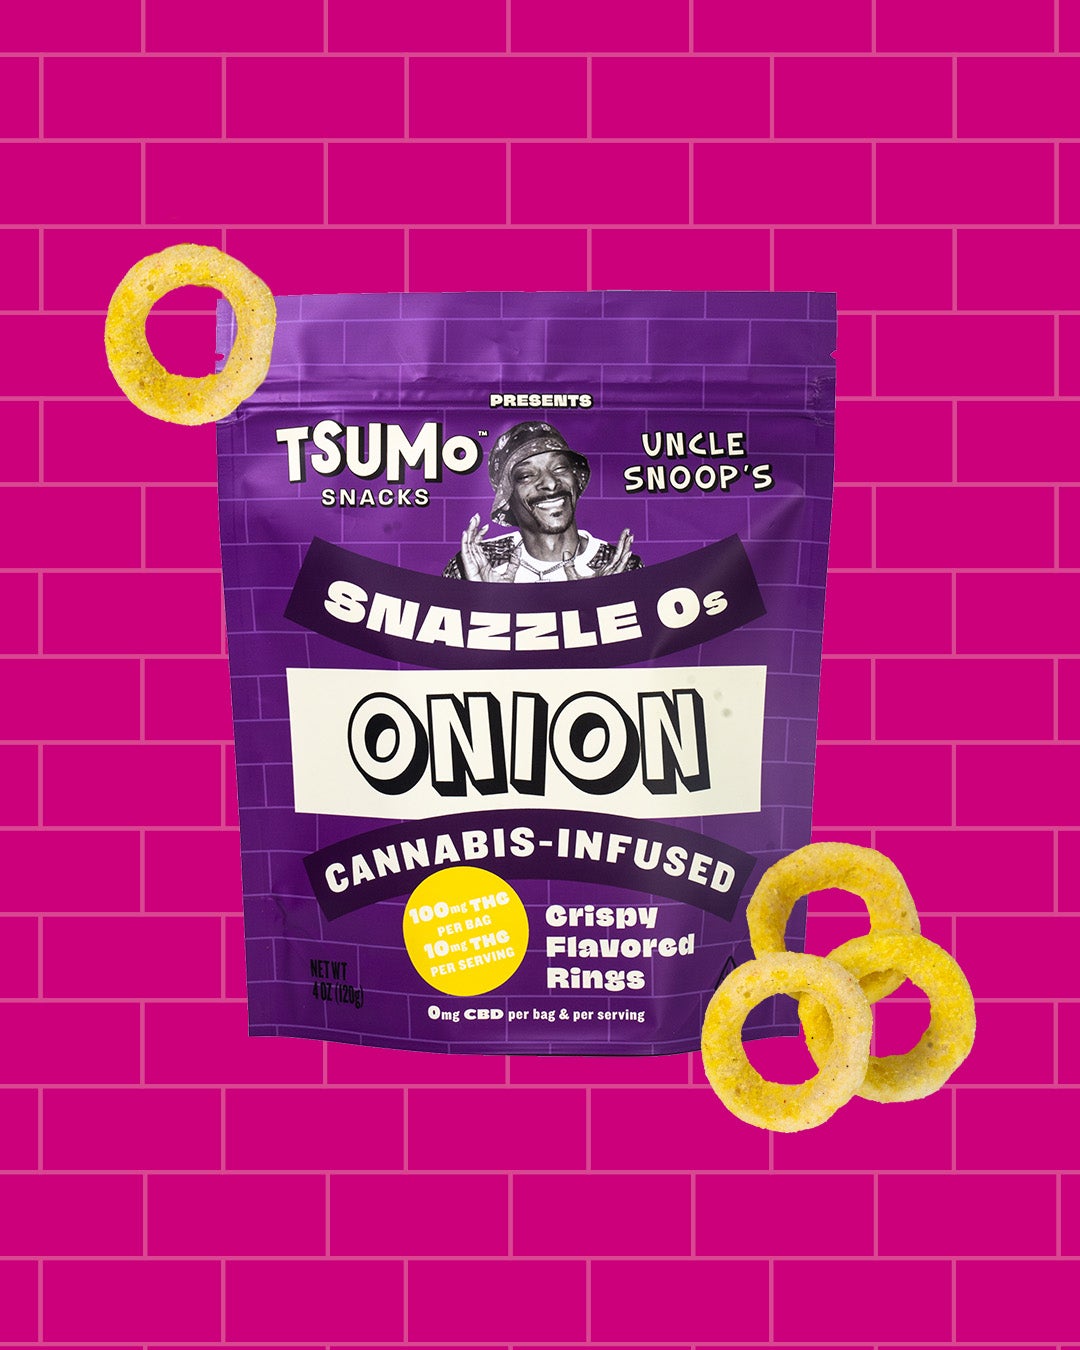 Snoop Dogg Launches Weed-Infused Potato Chip Brand As The Latest Move In His Burgeoning Cannabis Empire